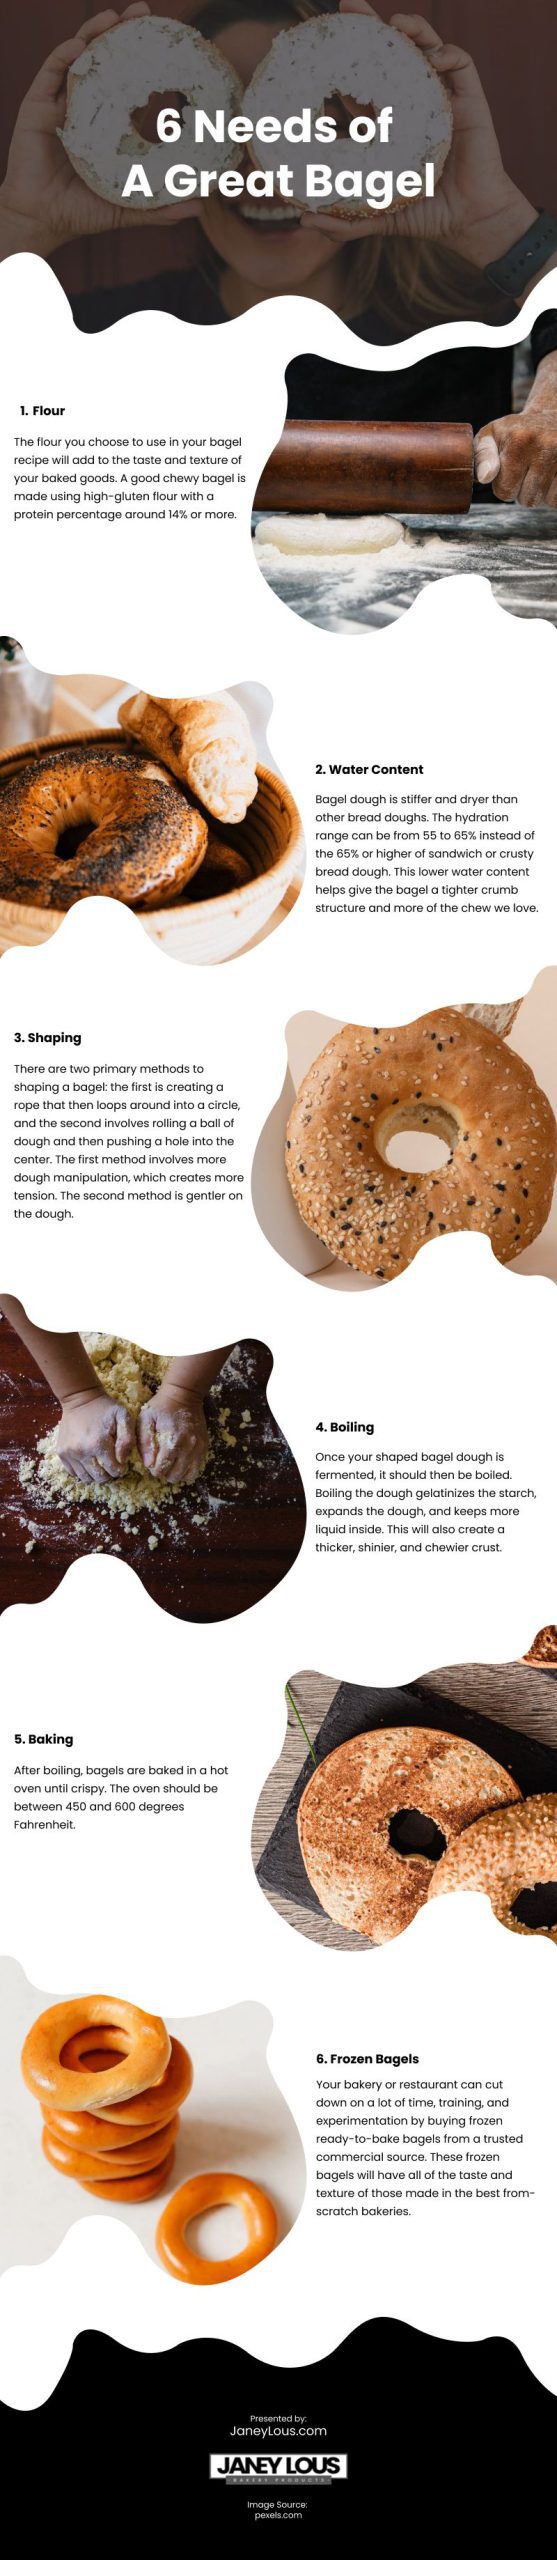 6 Needs of A Great Bagel Infographic